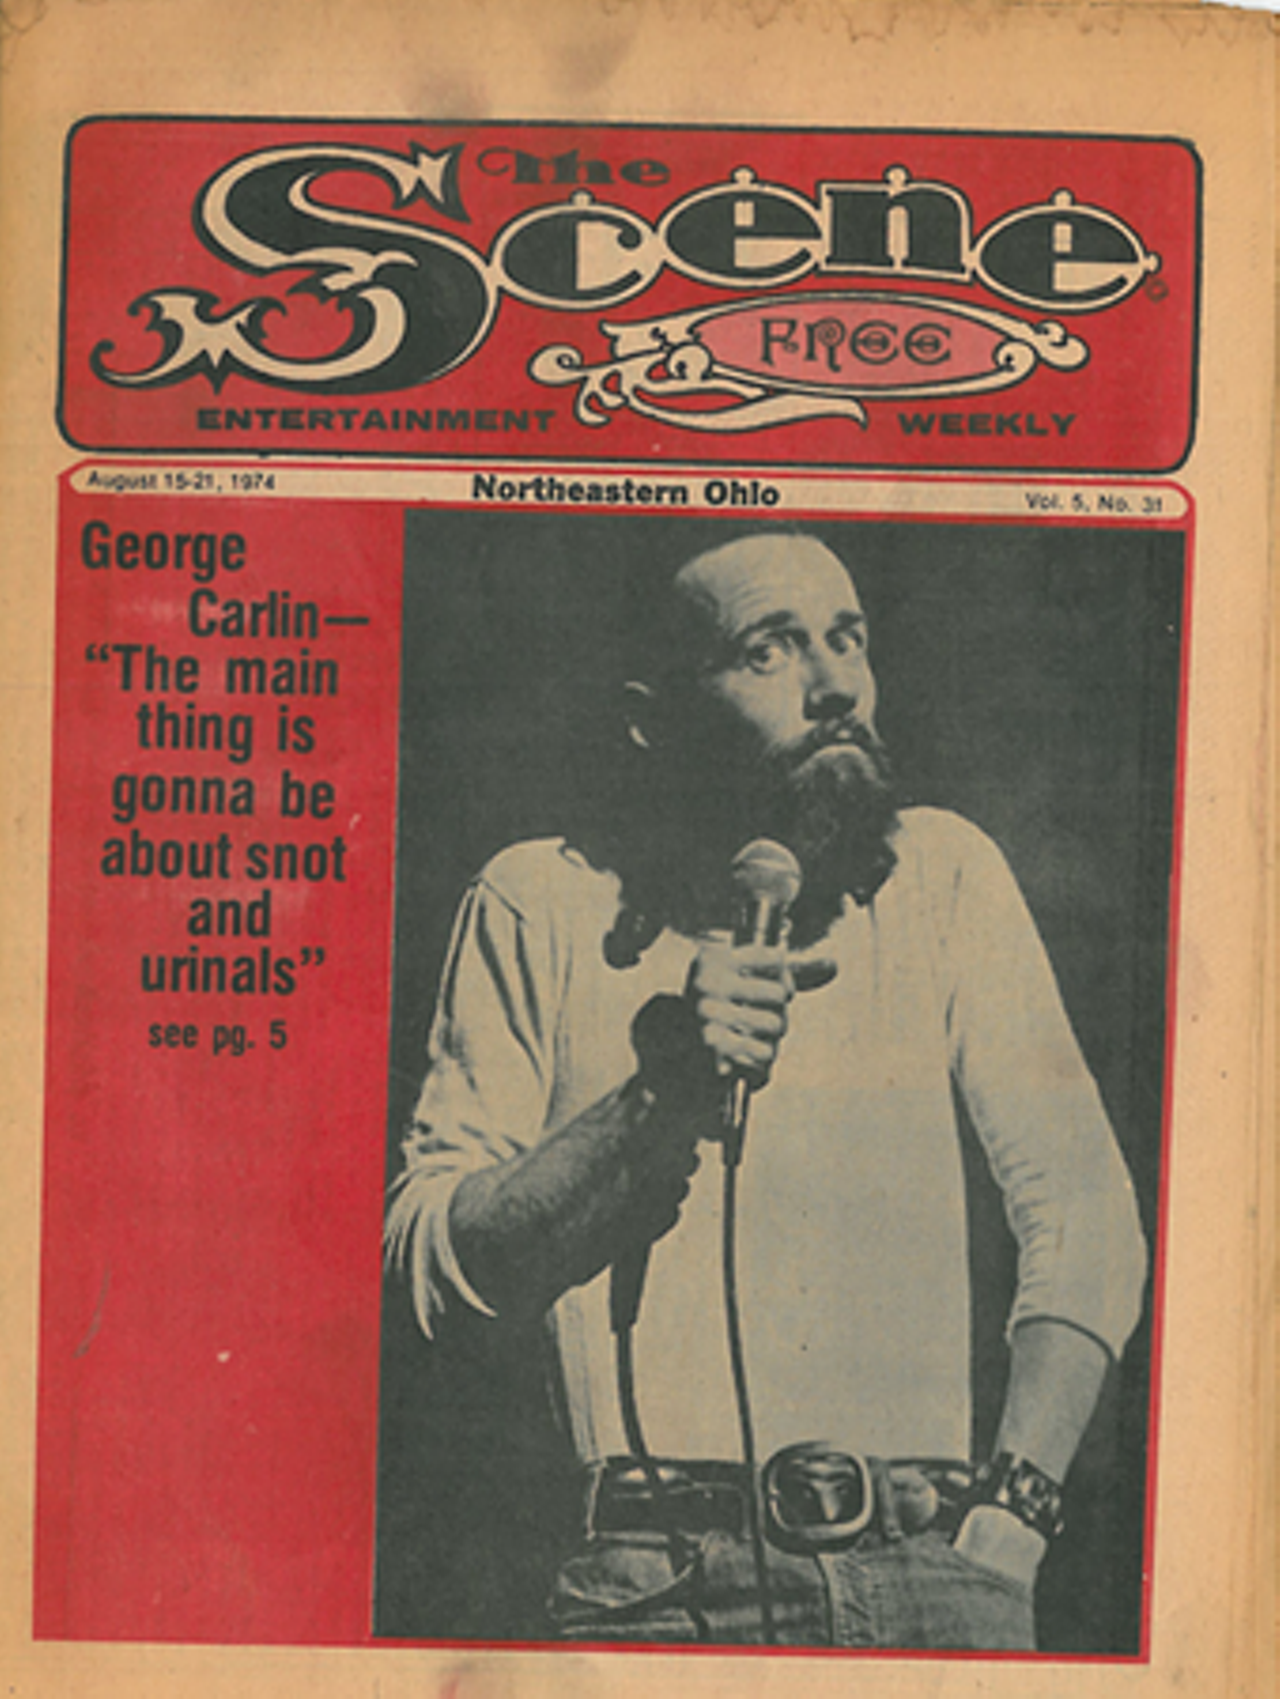 George Carlin&#151; 'The main thing is gonna be about snot and urinals, 1974